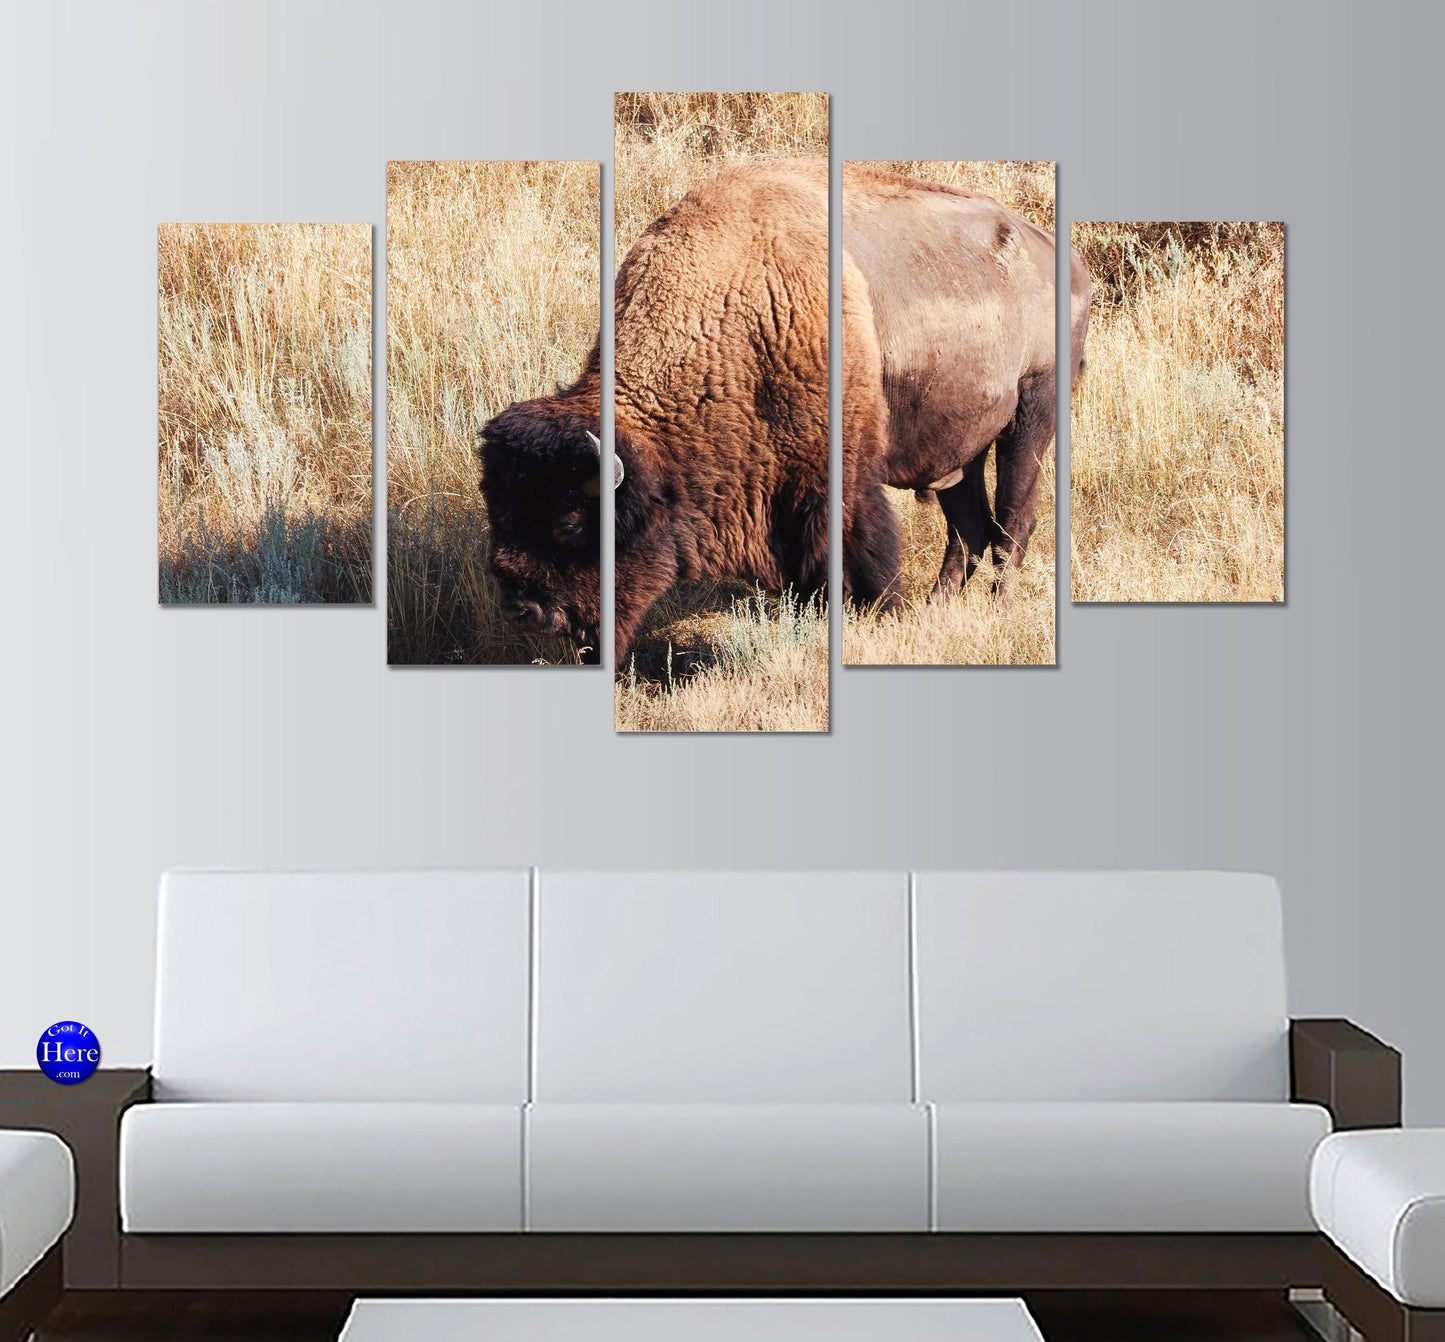 American Buffalo At Theodore Roosevelt National Park 5 Panel Canvas Print Wall Art - GotItHere.com